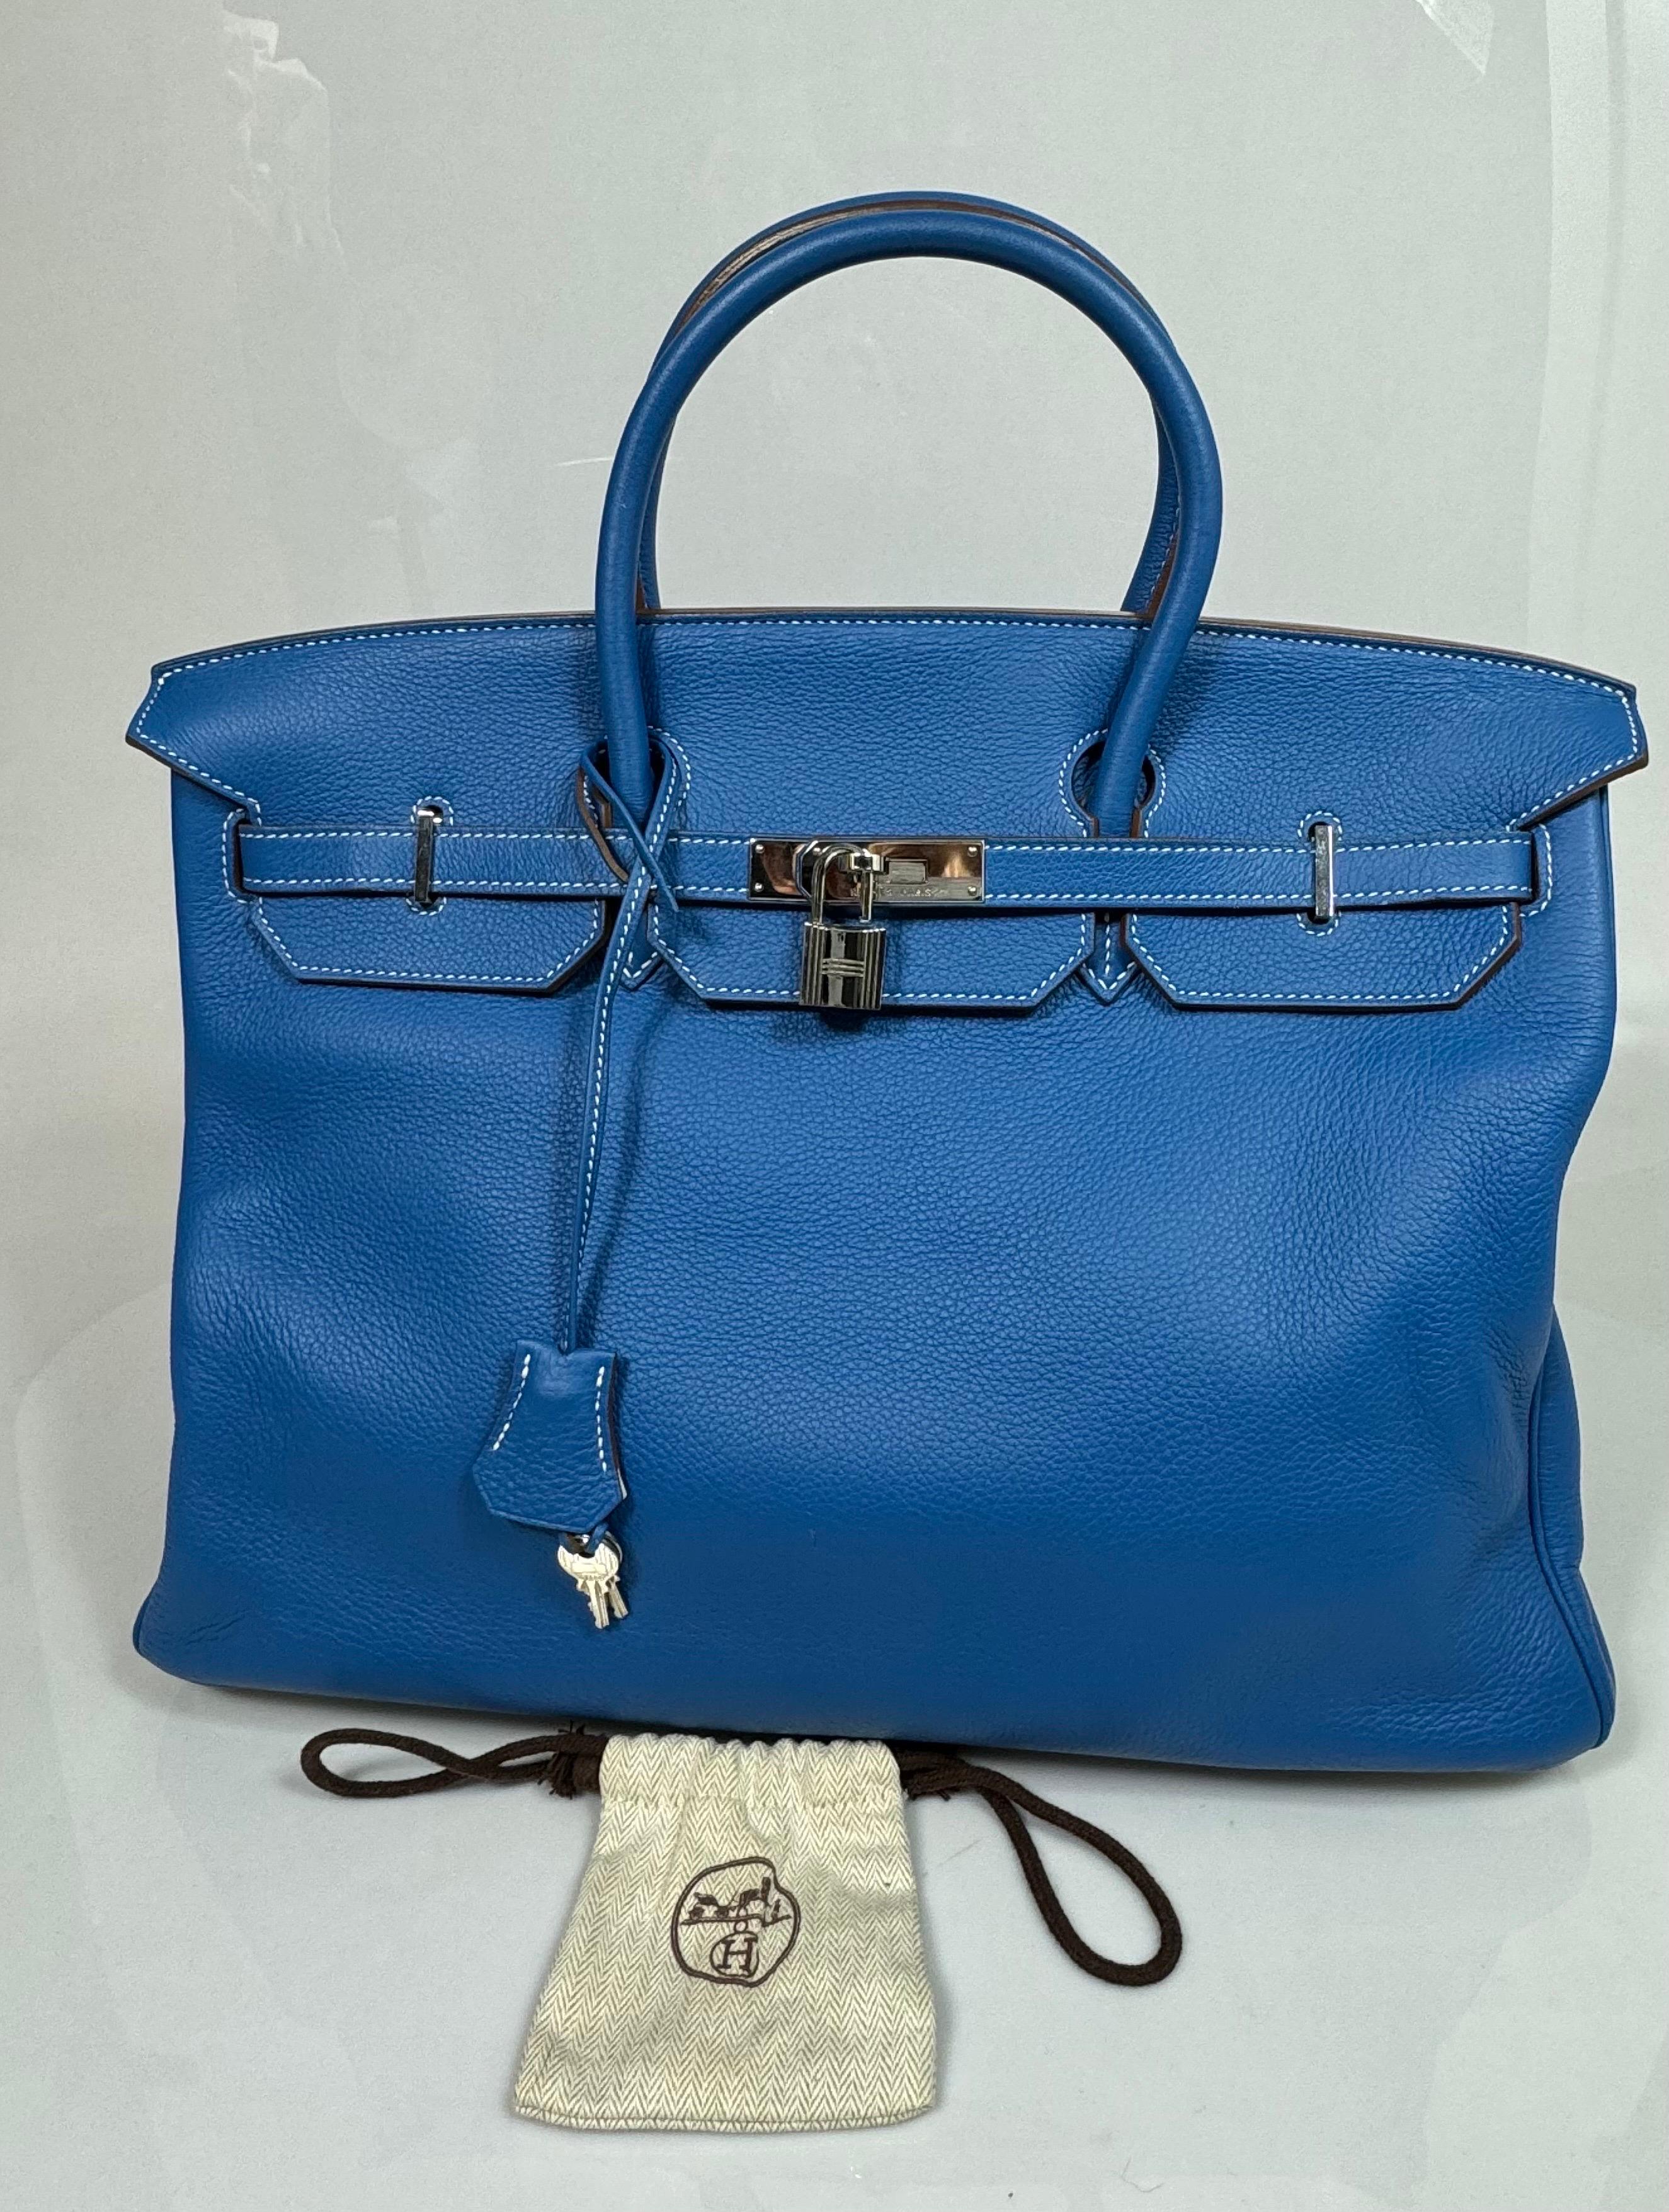 Hermes 40cm  Mykonos Blue and White Clemence Limited edition Birkin-SHW -2011 For Sale 11